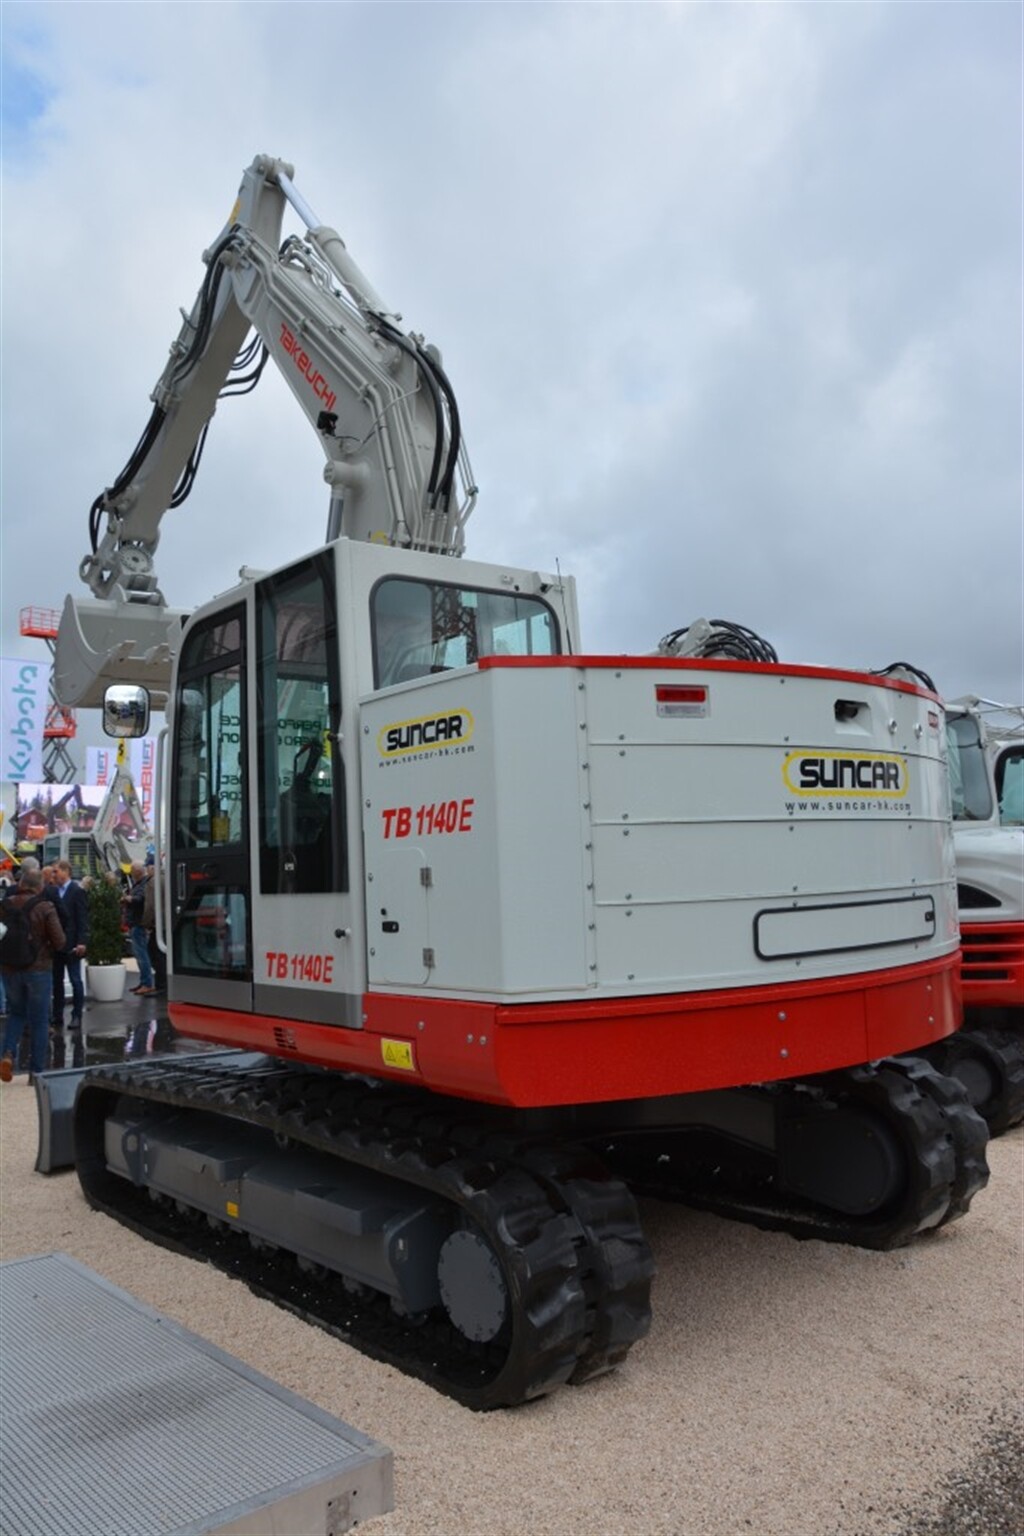 Electric dreams on the Takeuchi stand